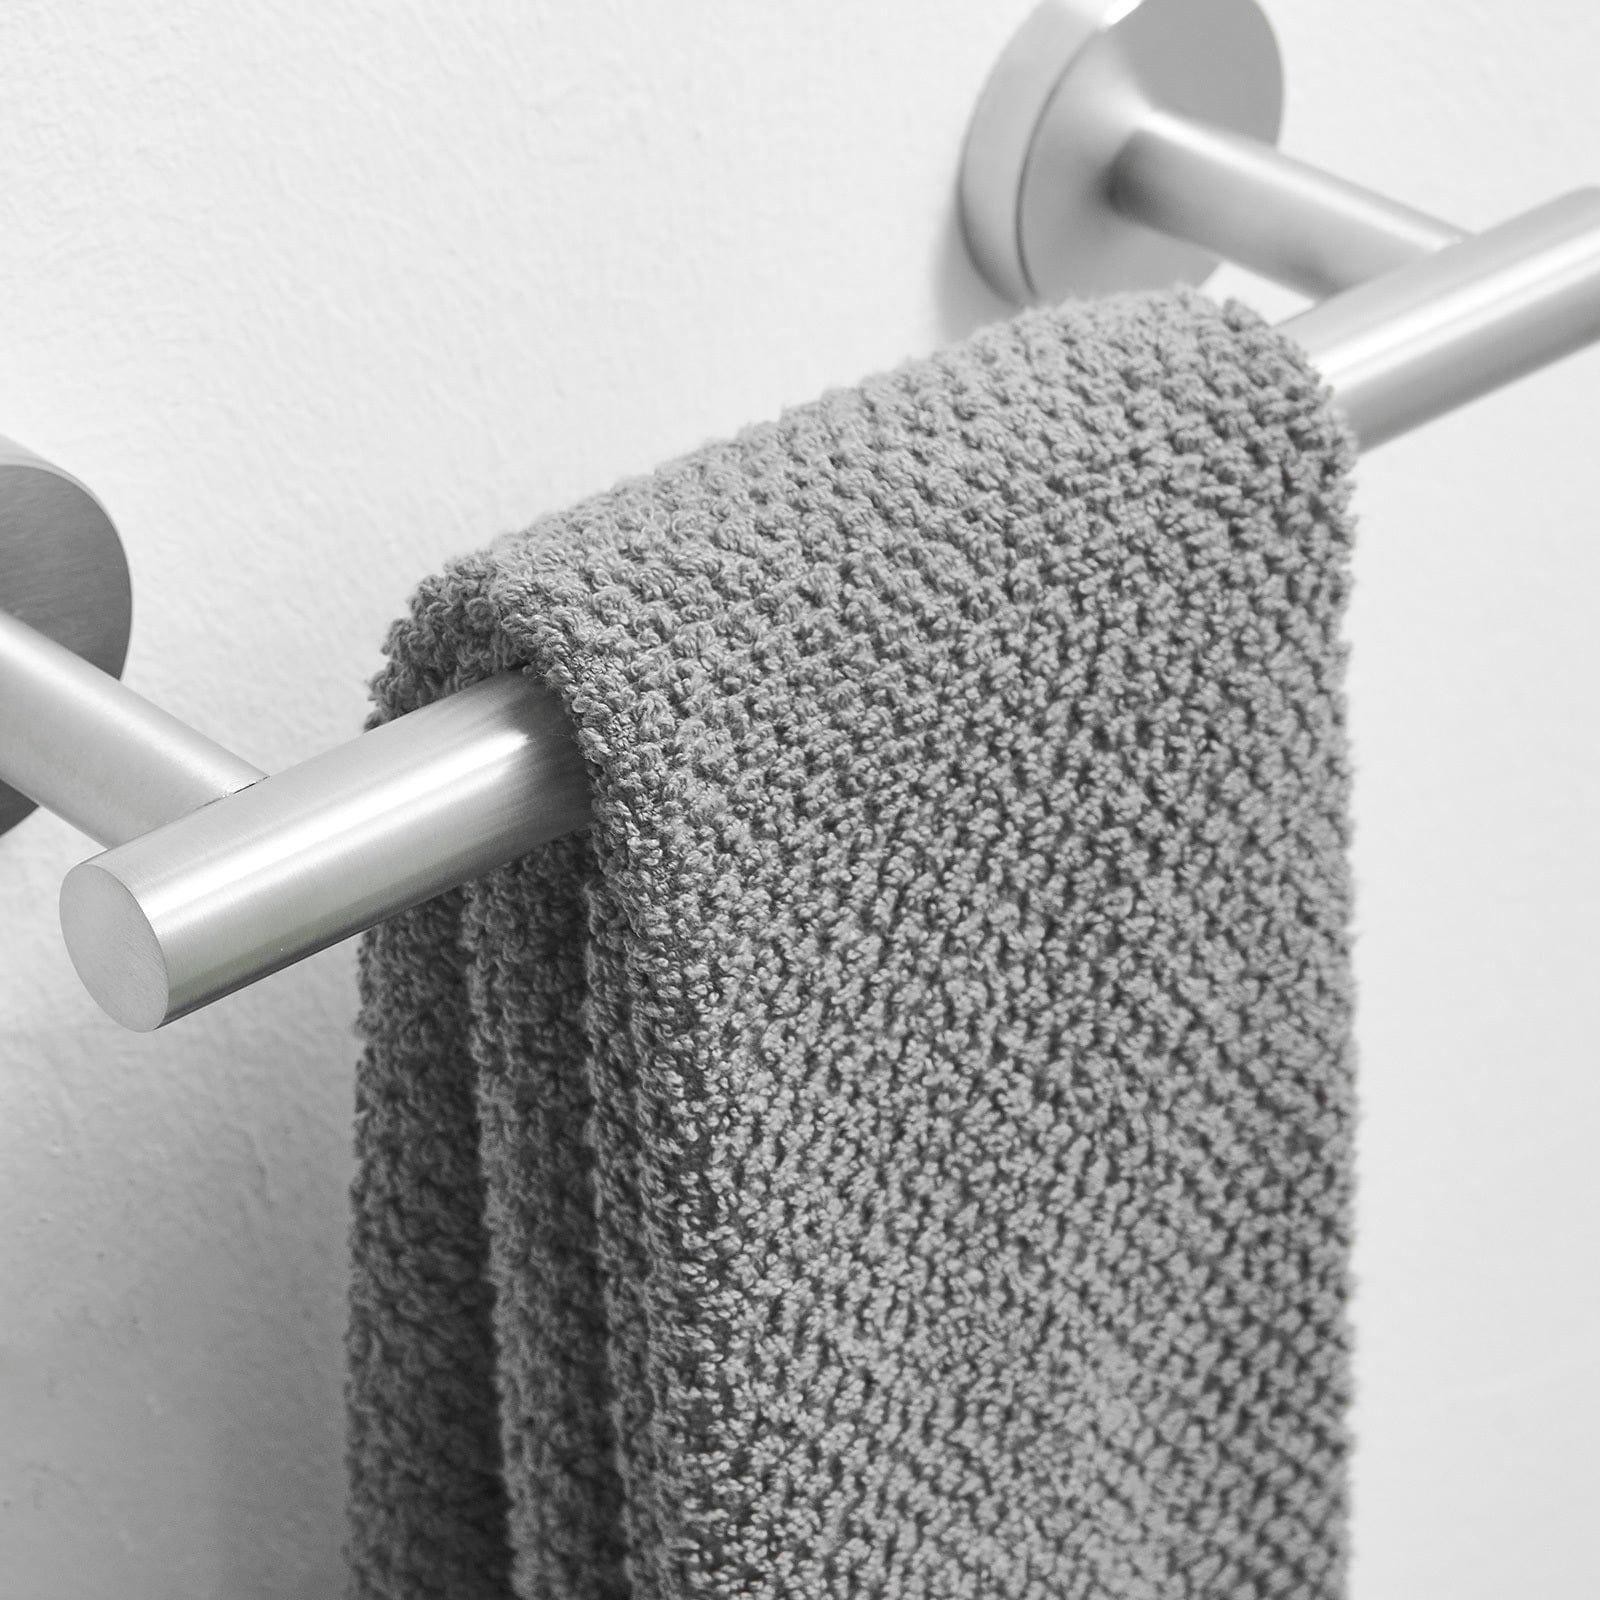 Shop Single Post Wall Mounted Towel Bar Toilet Paper Holder in Brushed Nickel Mademoiselle Home Decor